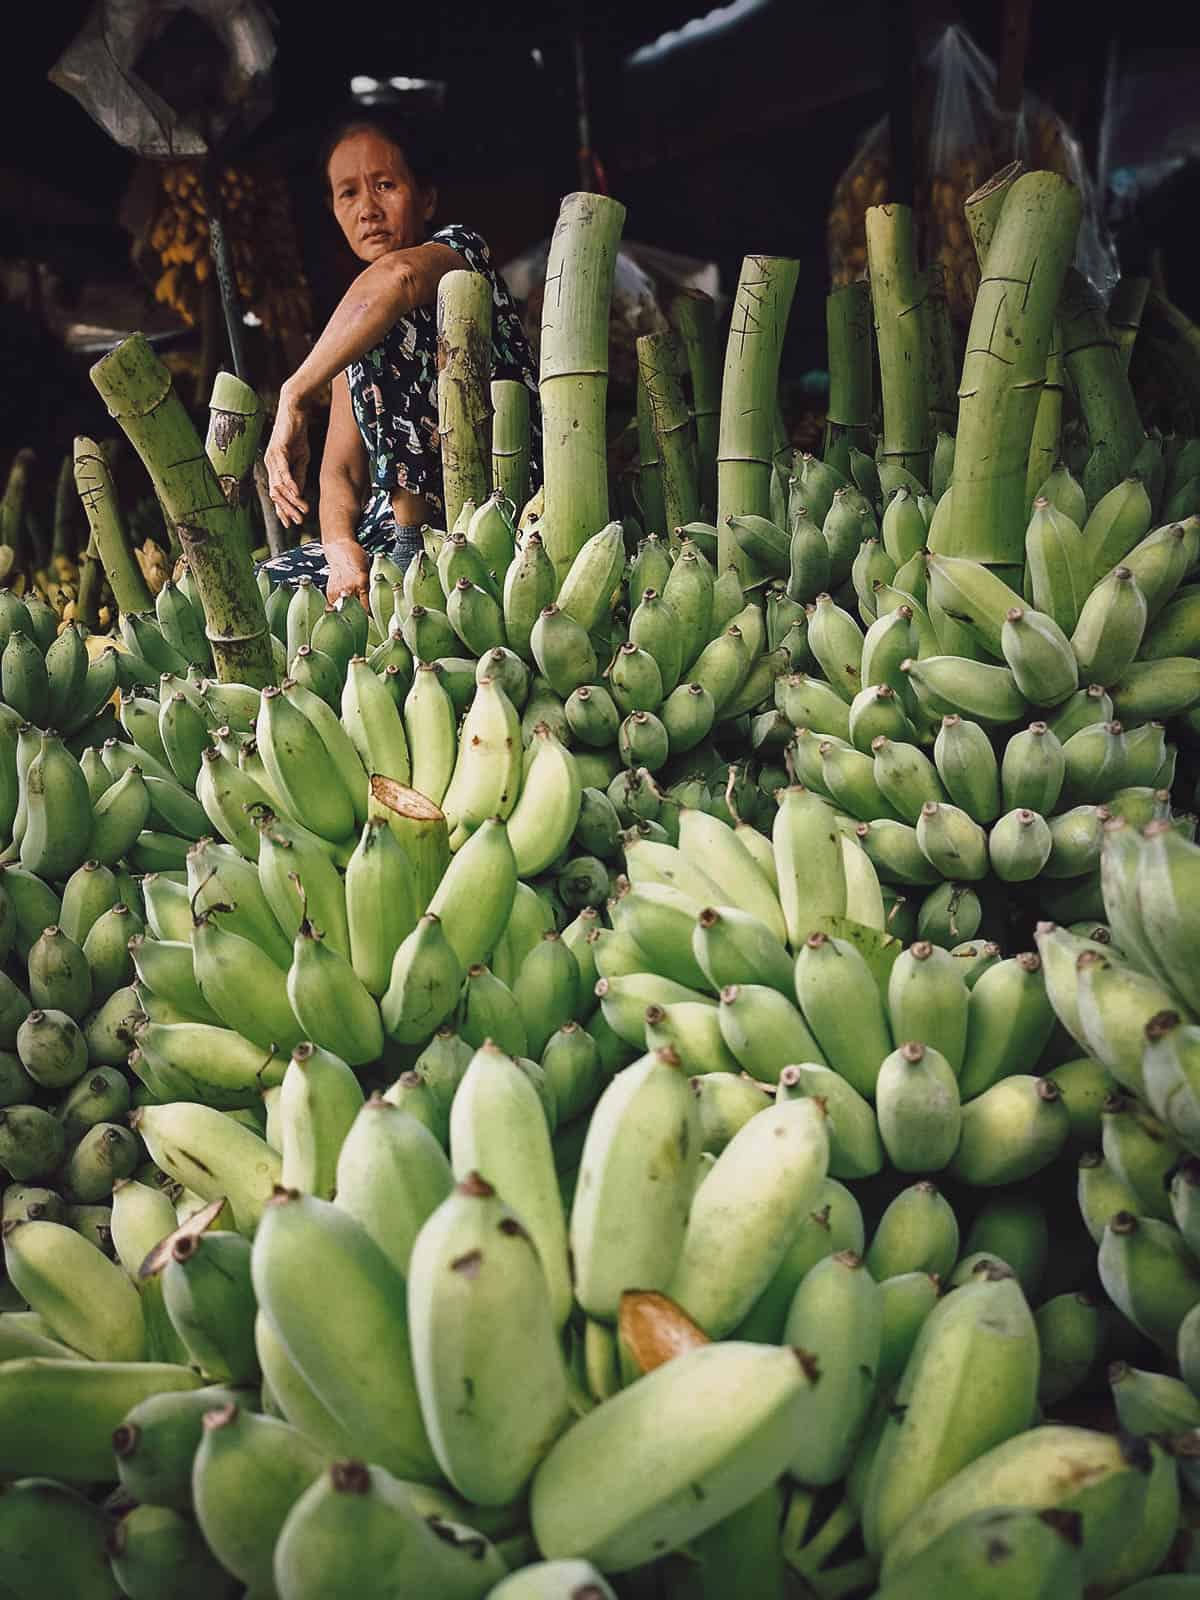 Vendor with her bananas